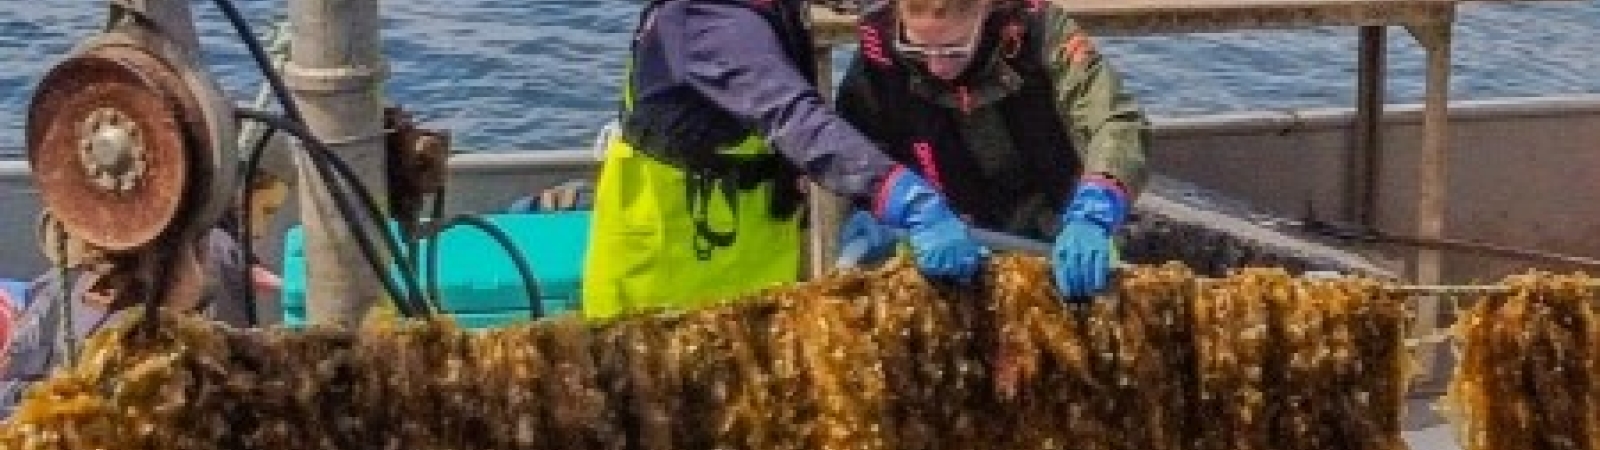 two people on a boat looking at a line of kelp